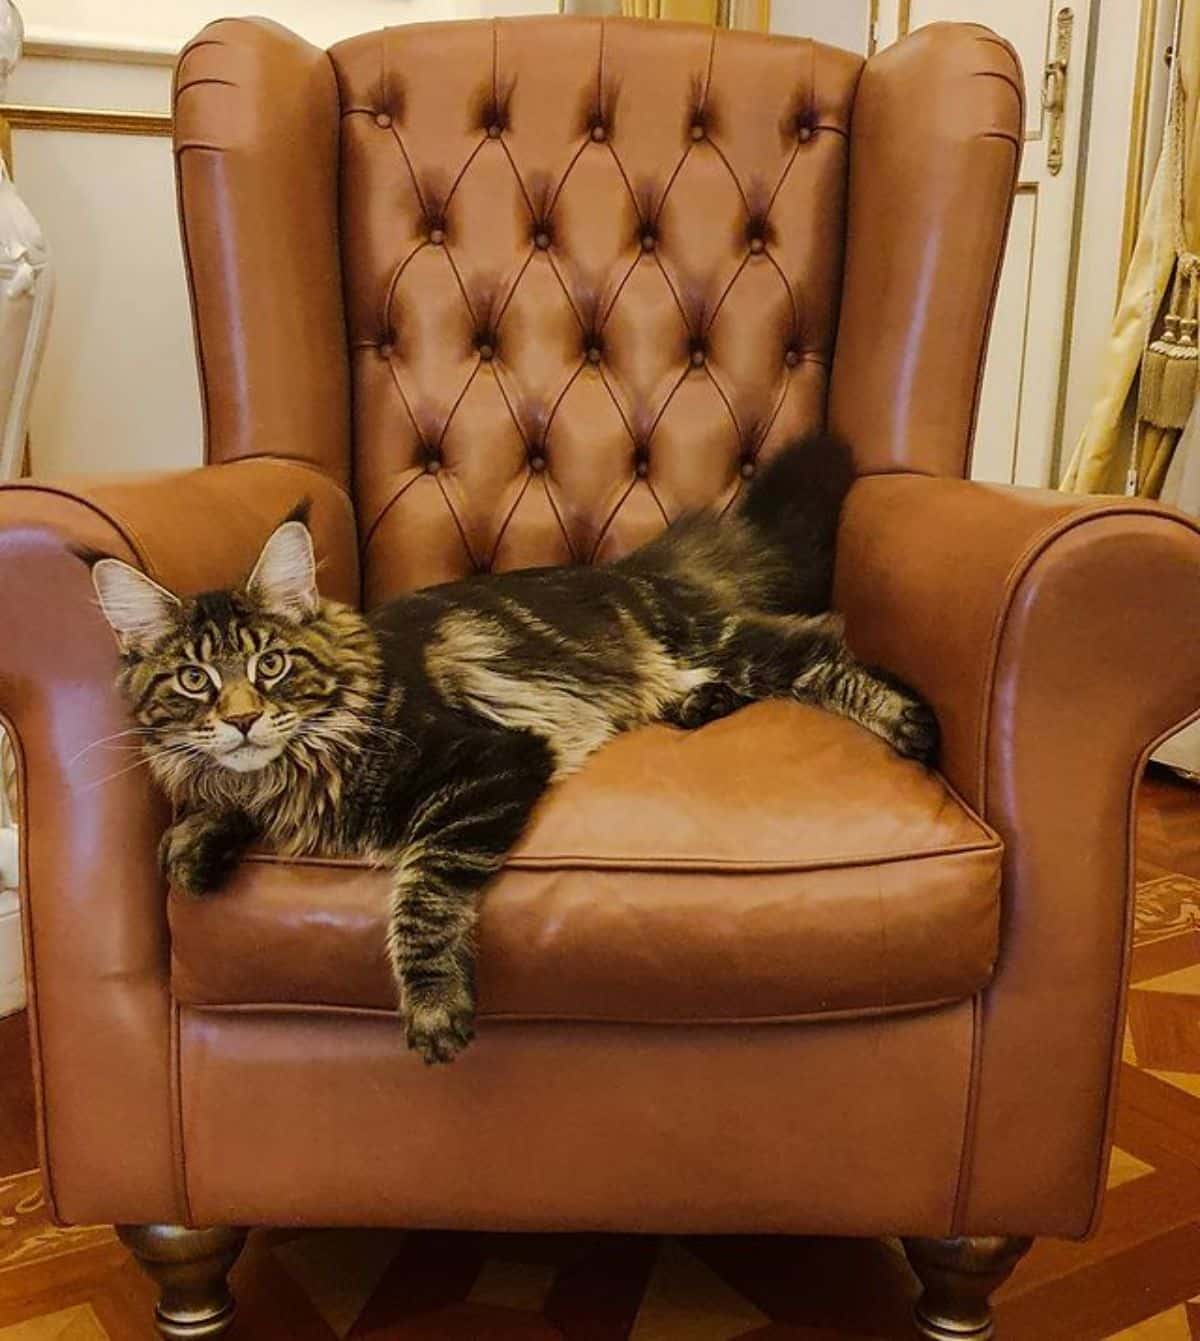 A brown maine coon lying on a leather chair.